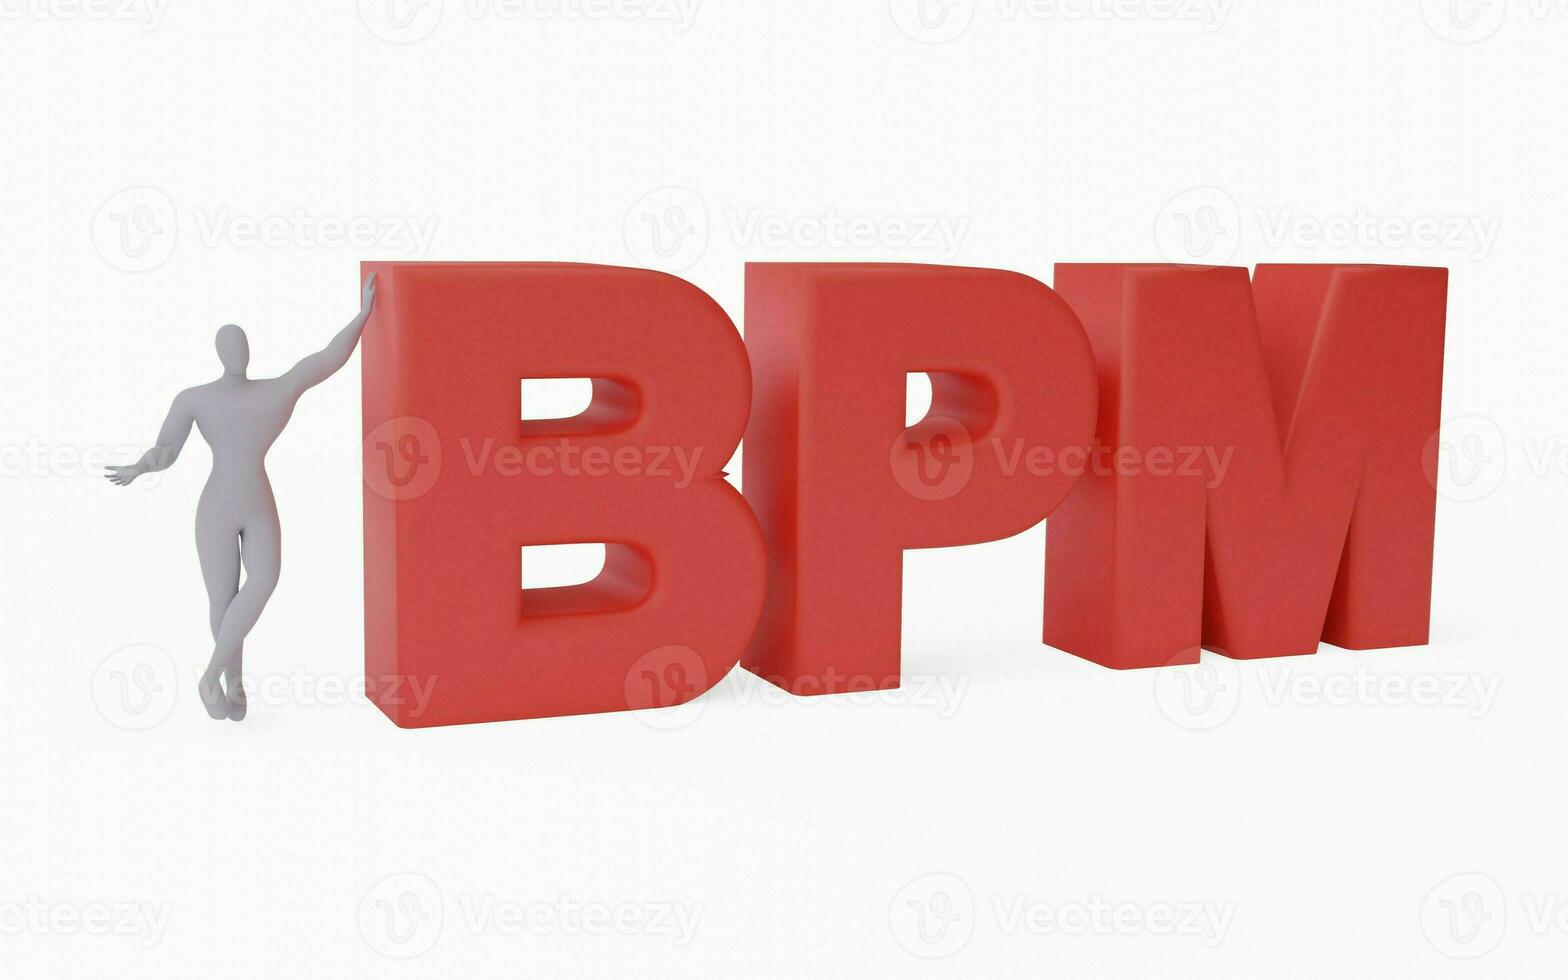 3D render of businessman leaning on the word BPM or business process management illustration. photo